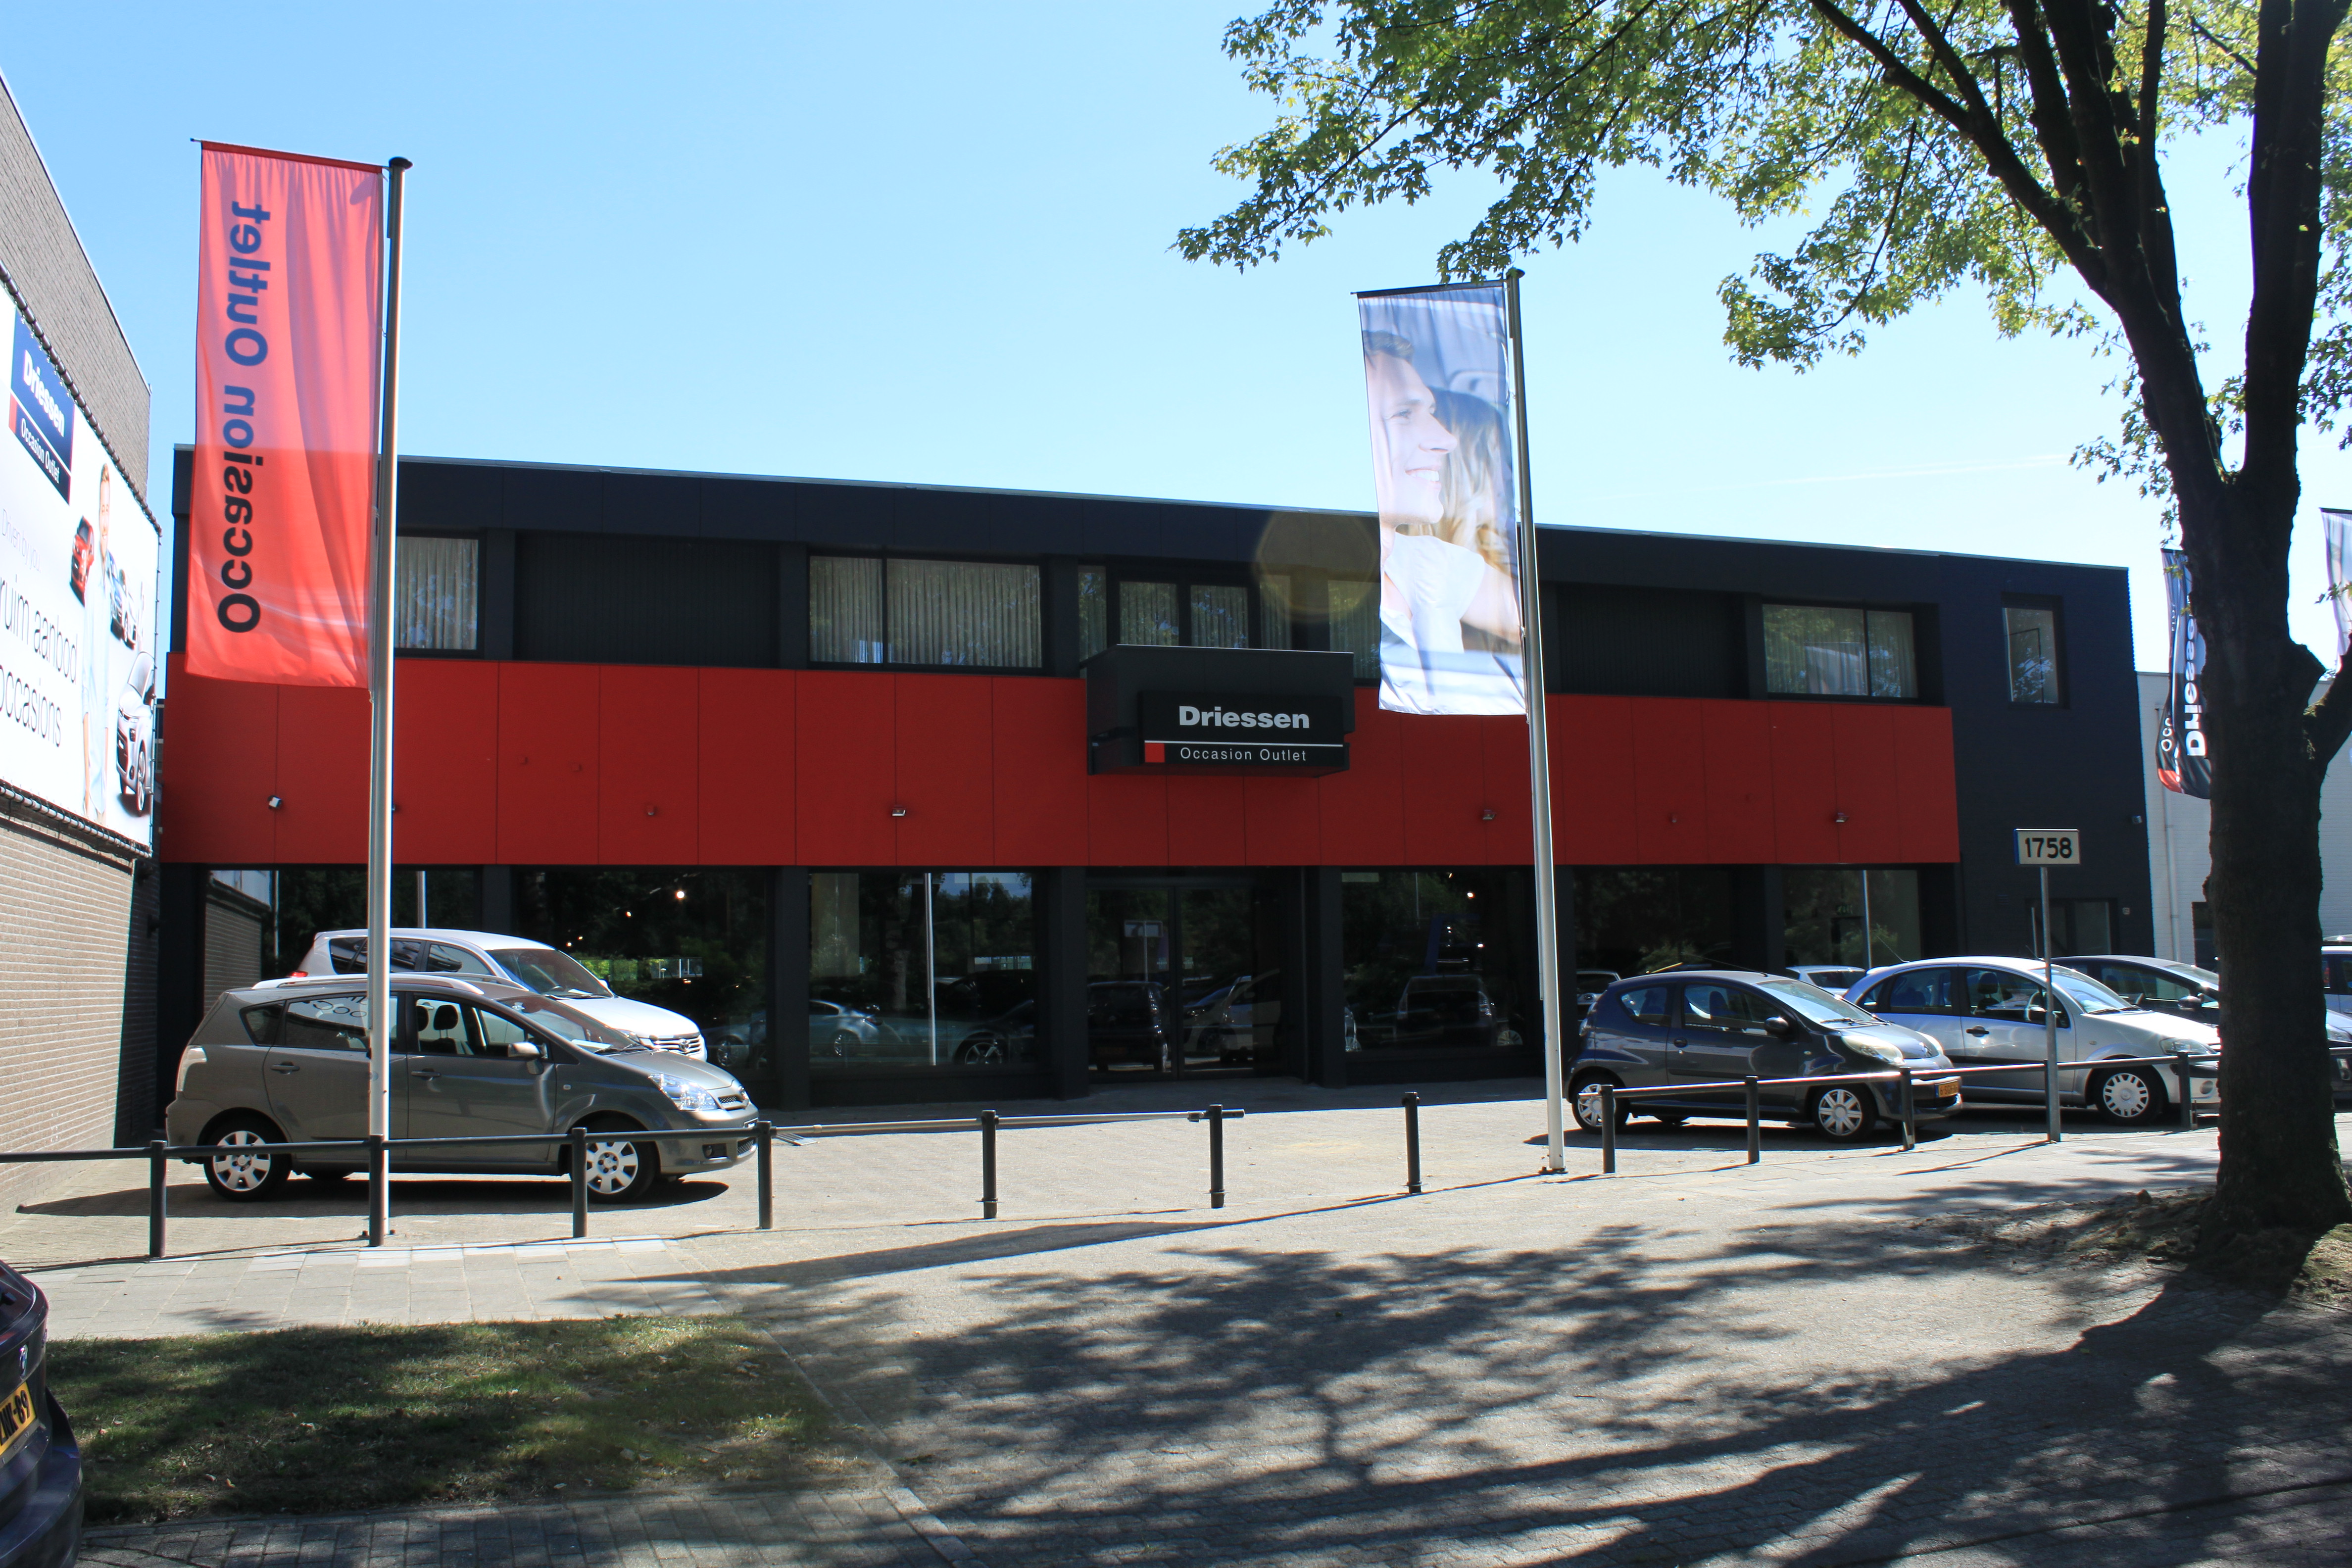 Occasion Outlet Eindhoven